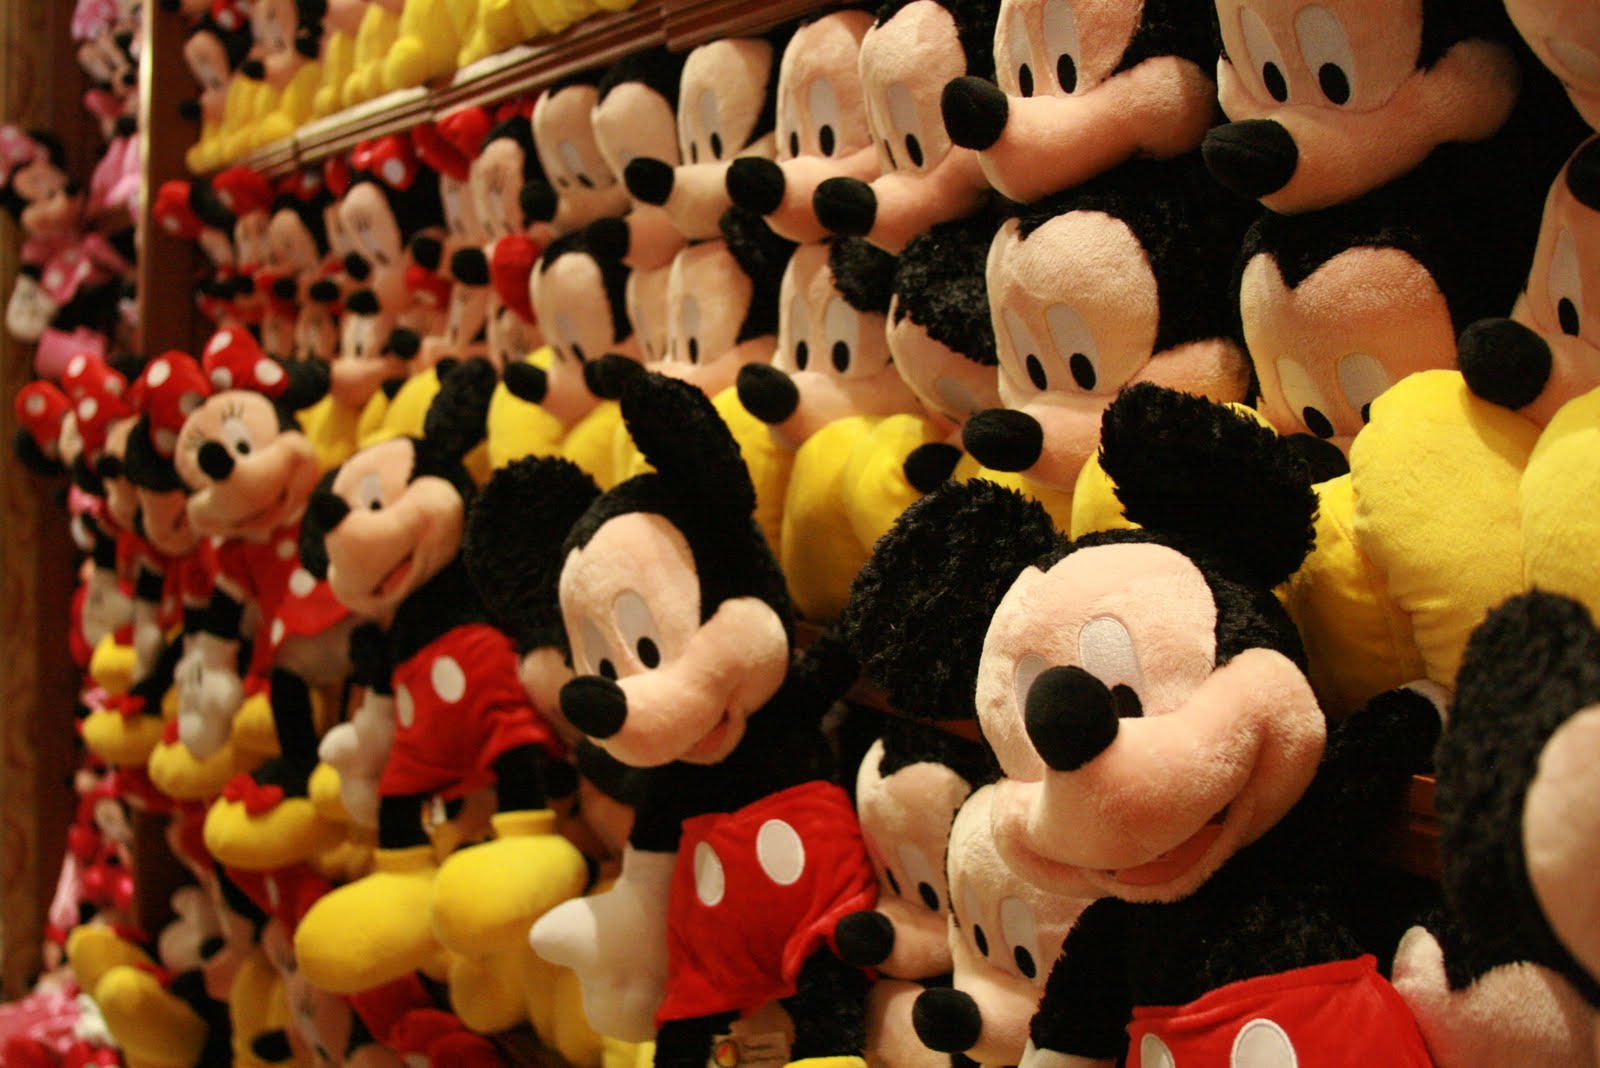 9 Souvenirs You'll Totally Regret Buying In Disney World